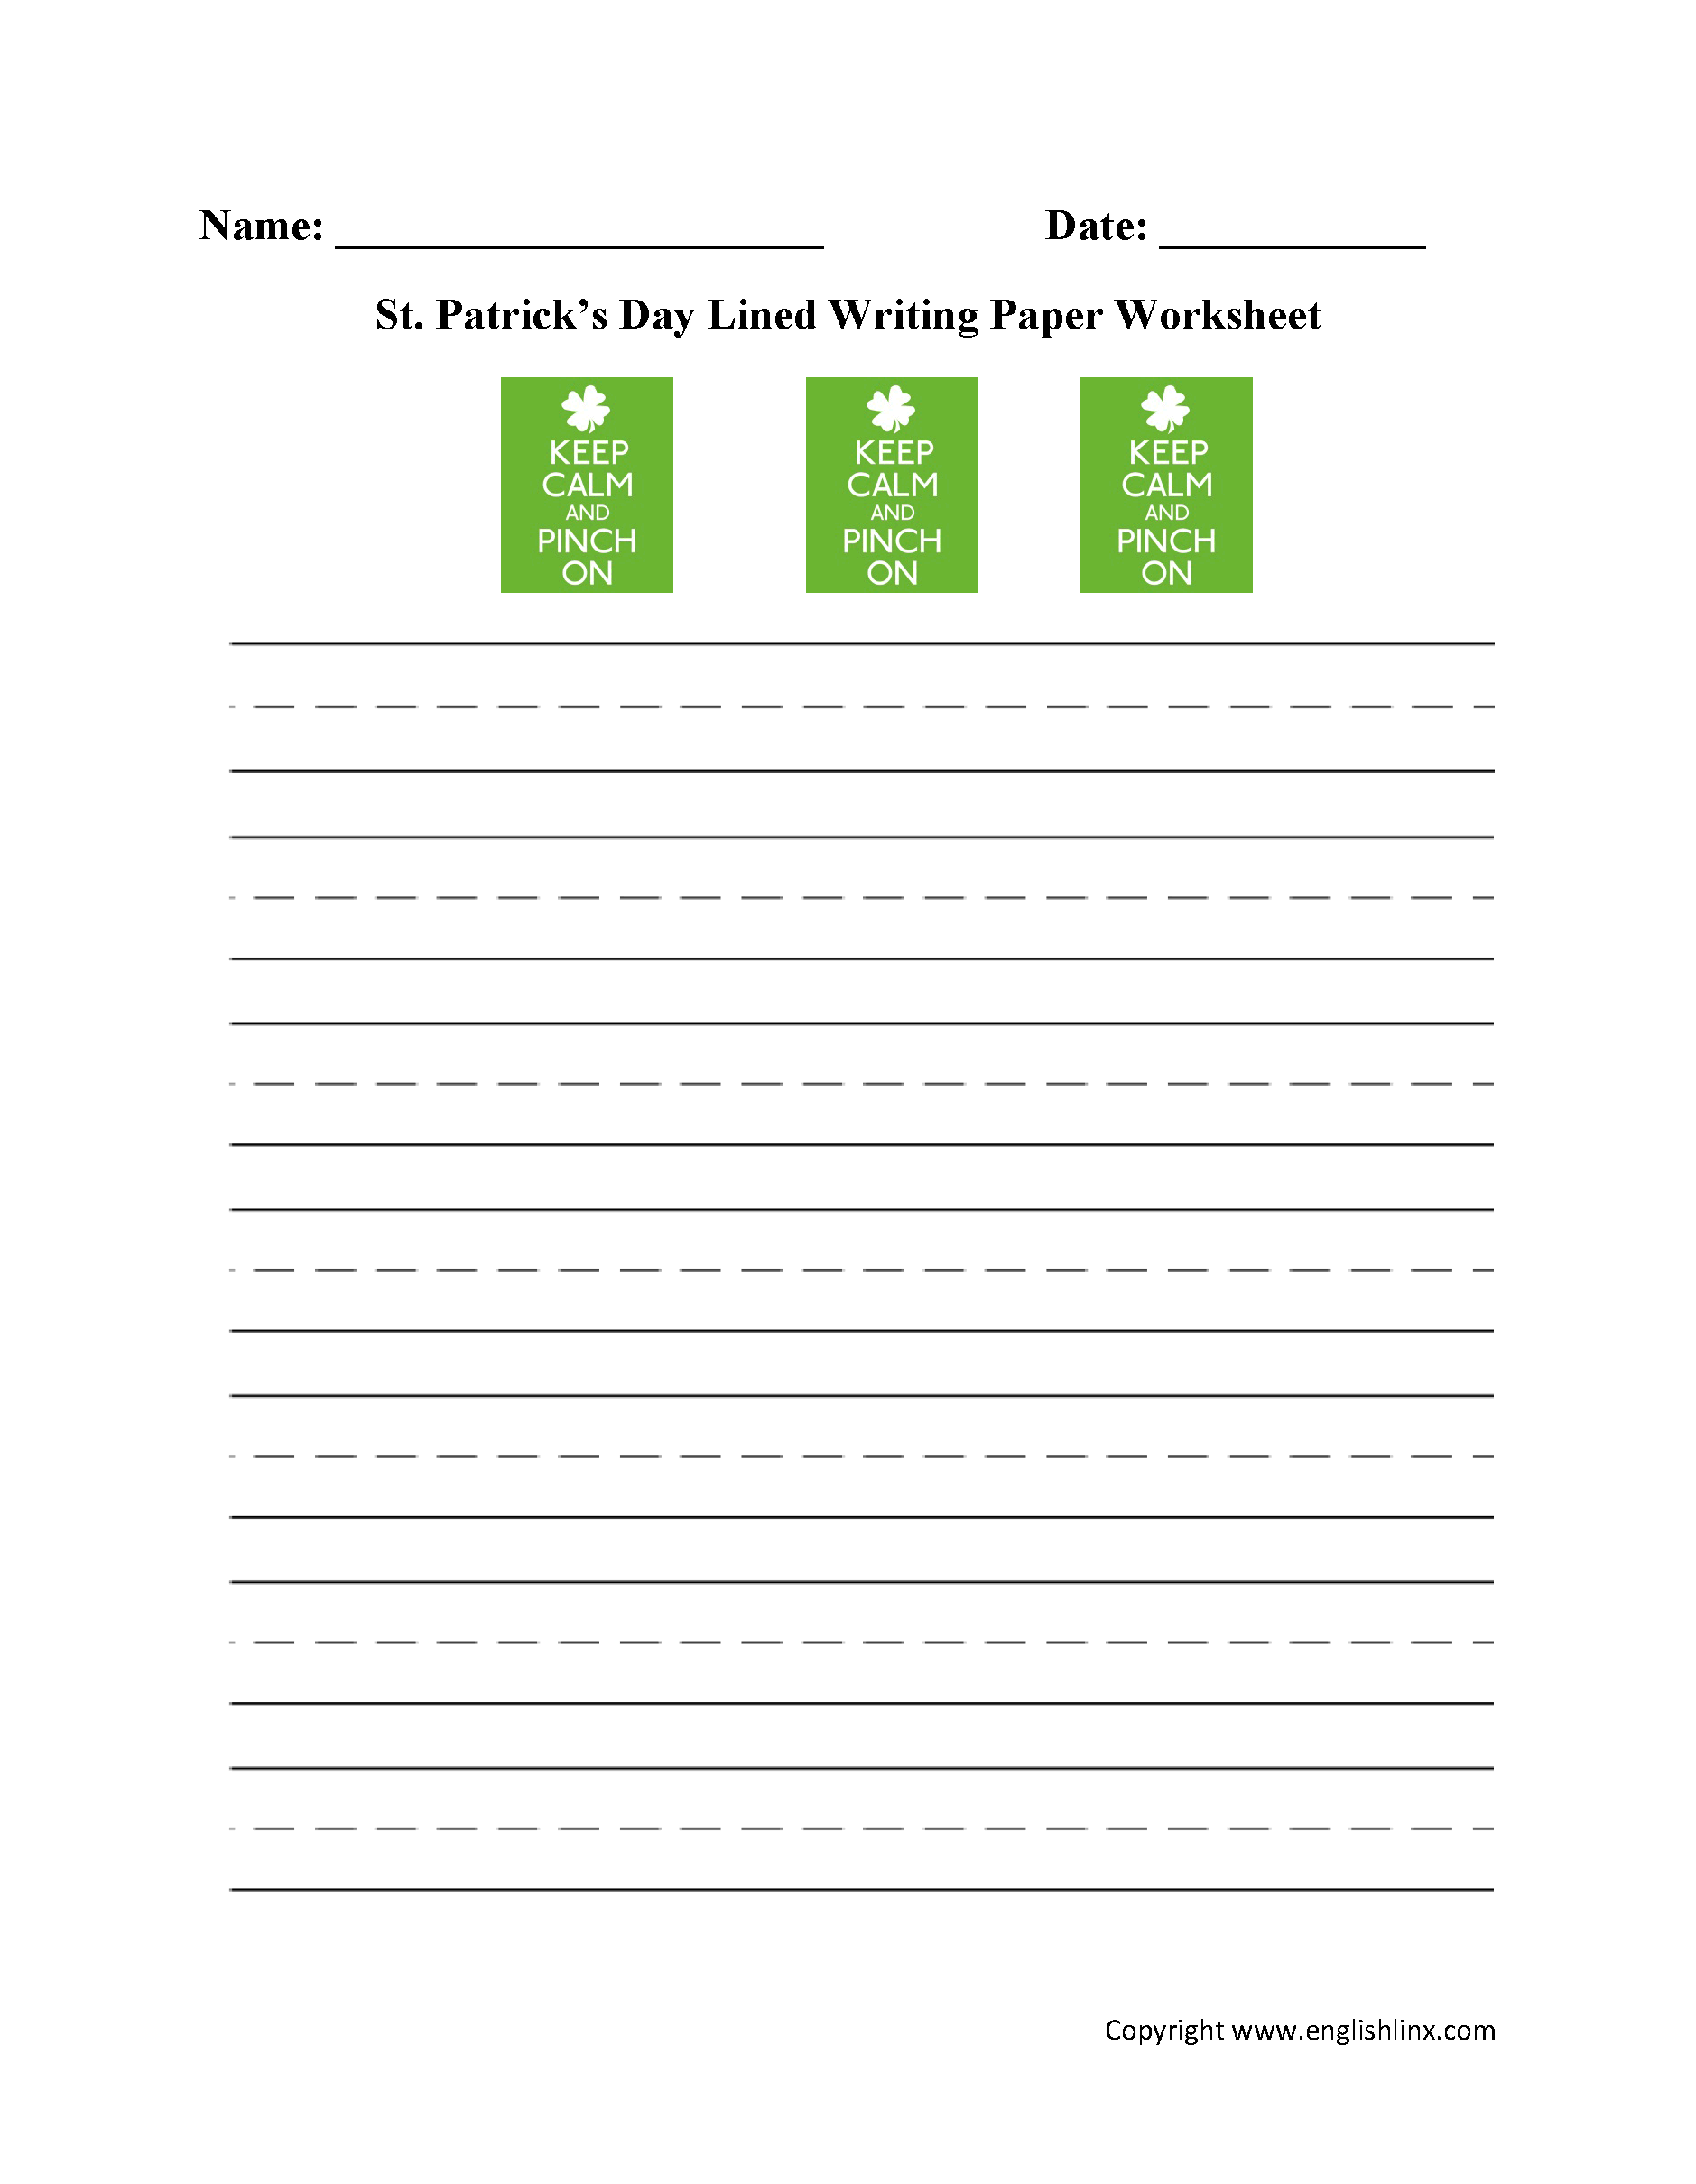 St. Patrick's Day Lined Writing Paper Worksheet